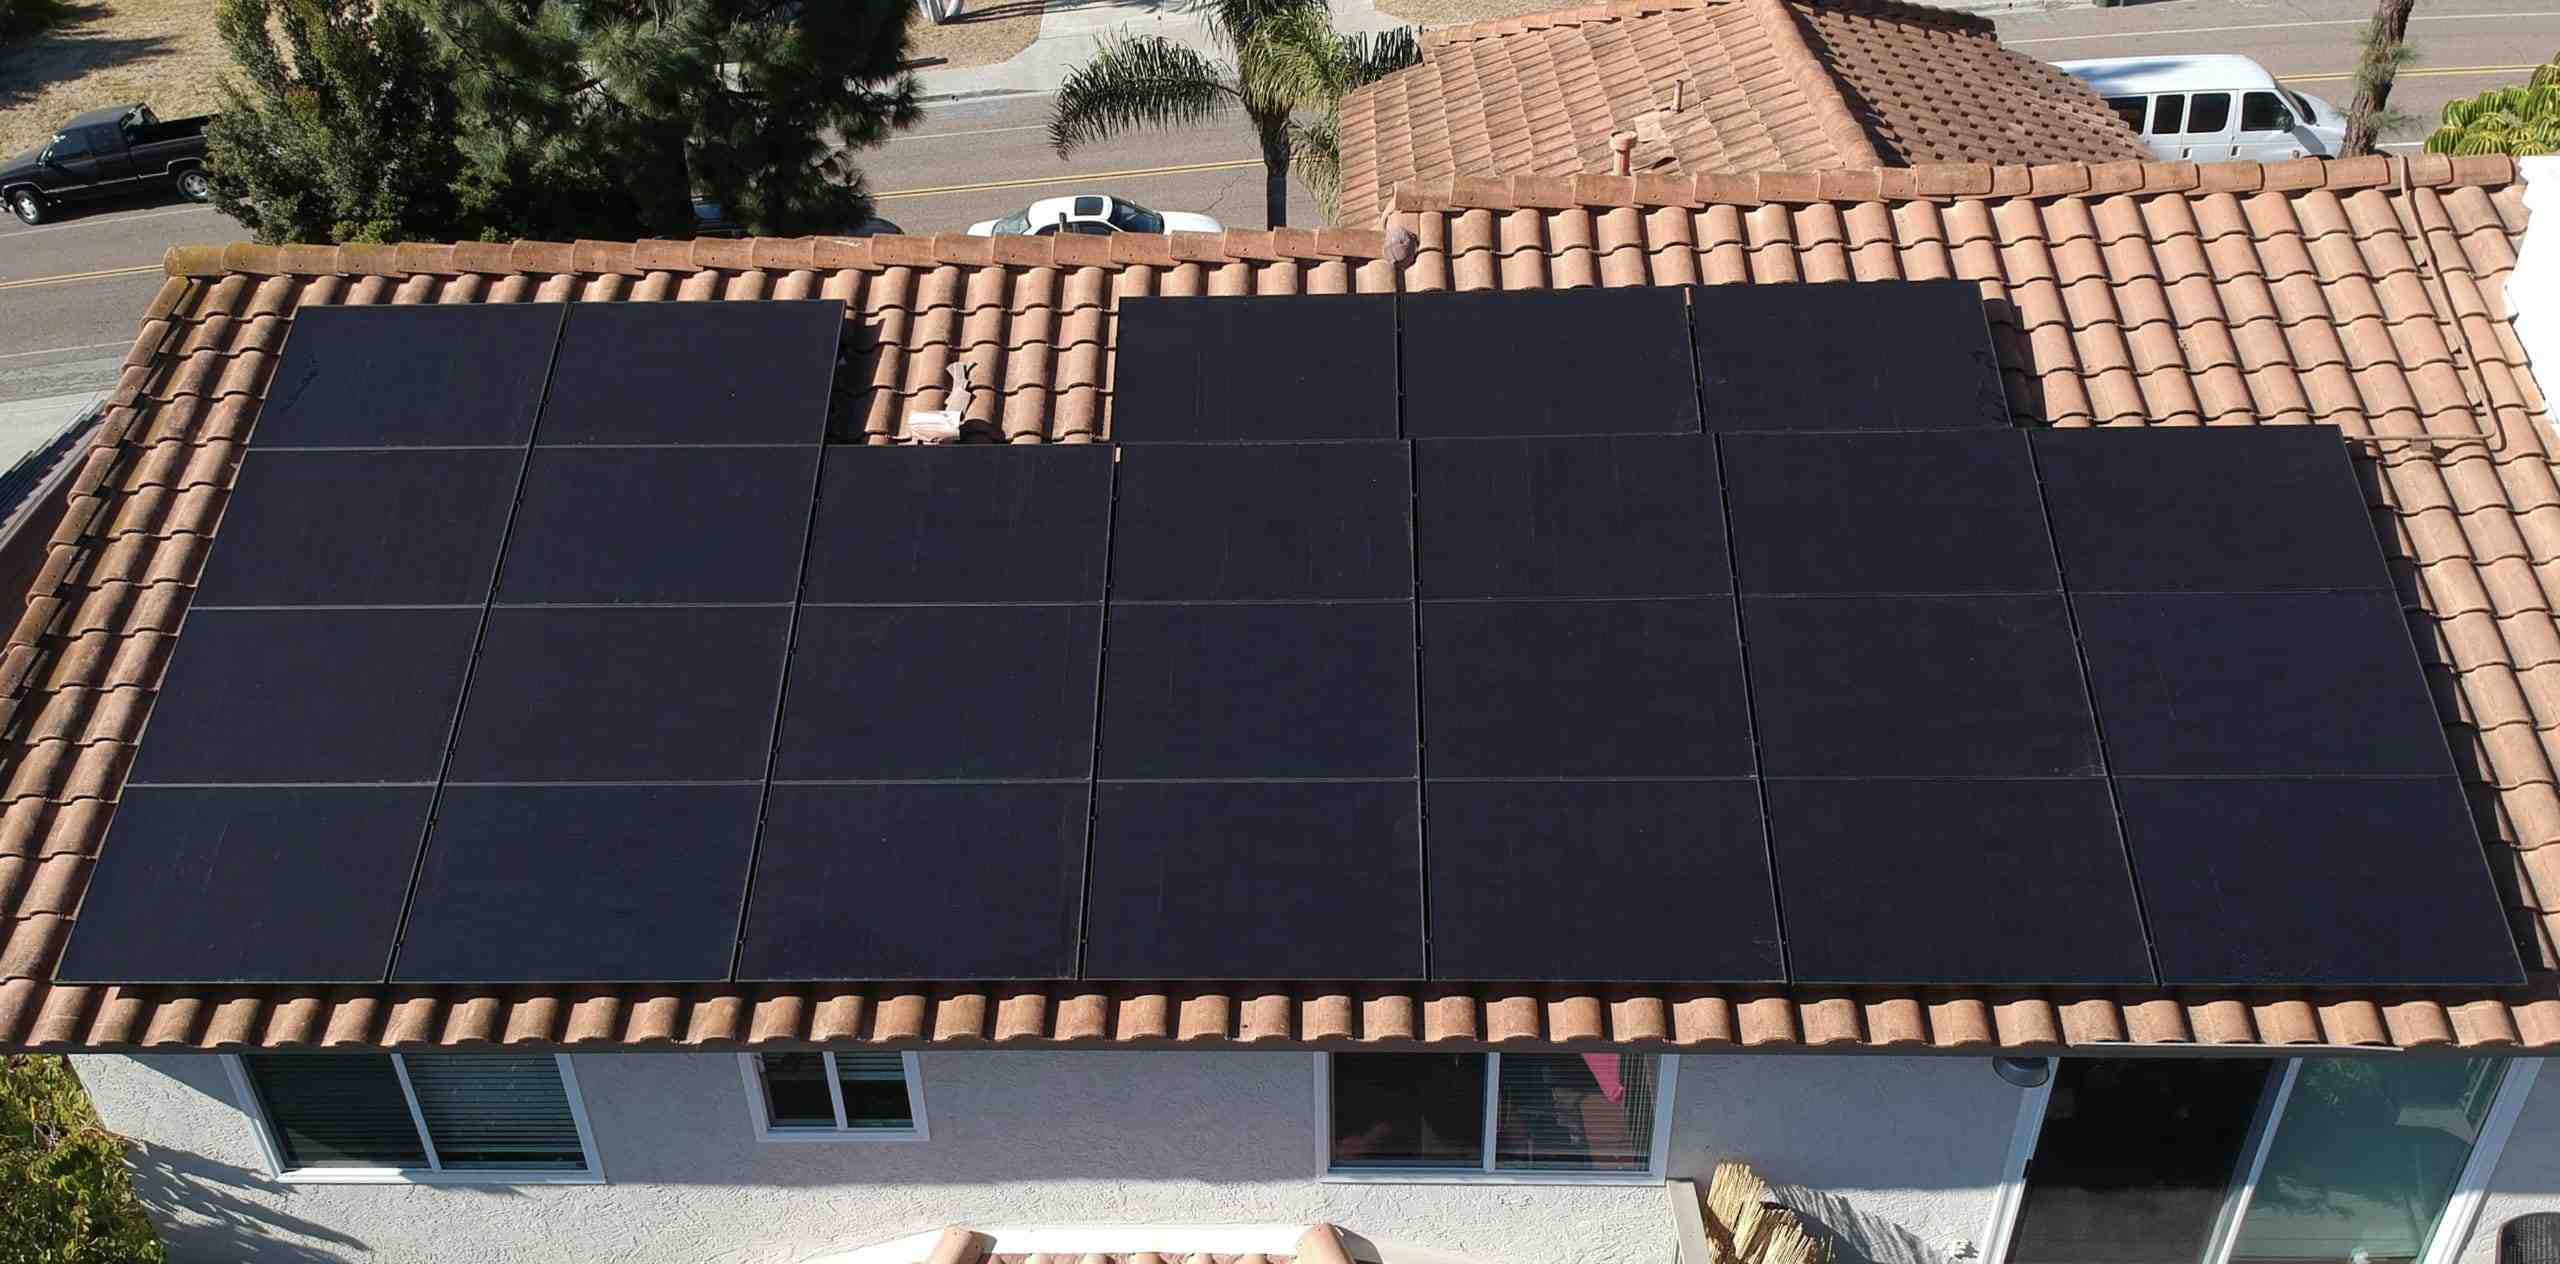 How do I get a loan for solar panels?